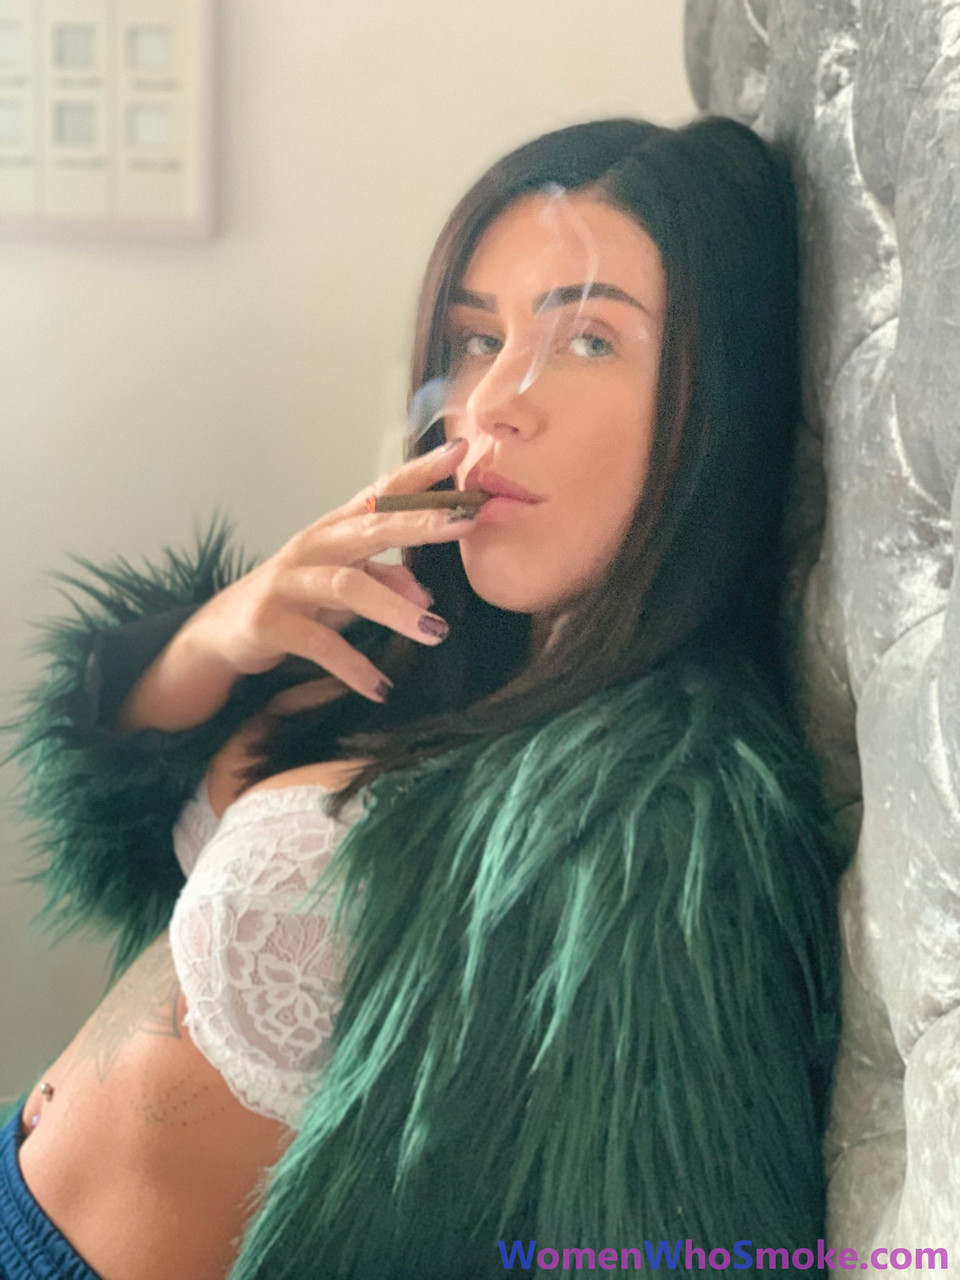 Stunning brunette teases with her big boobs while smoking in sexy lingerie порно фото #426607880 | Women Who Smoke Pics, Smoking, мобильное порно